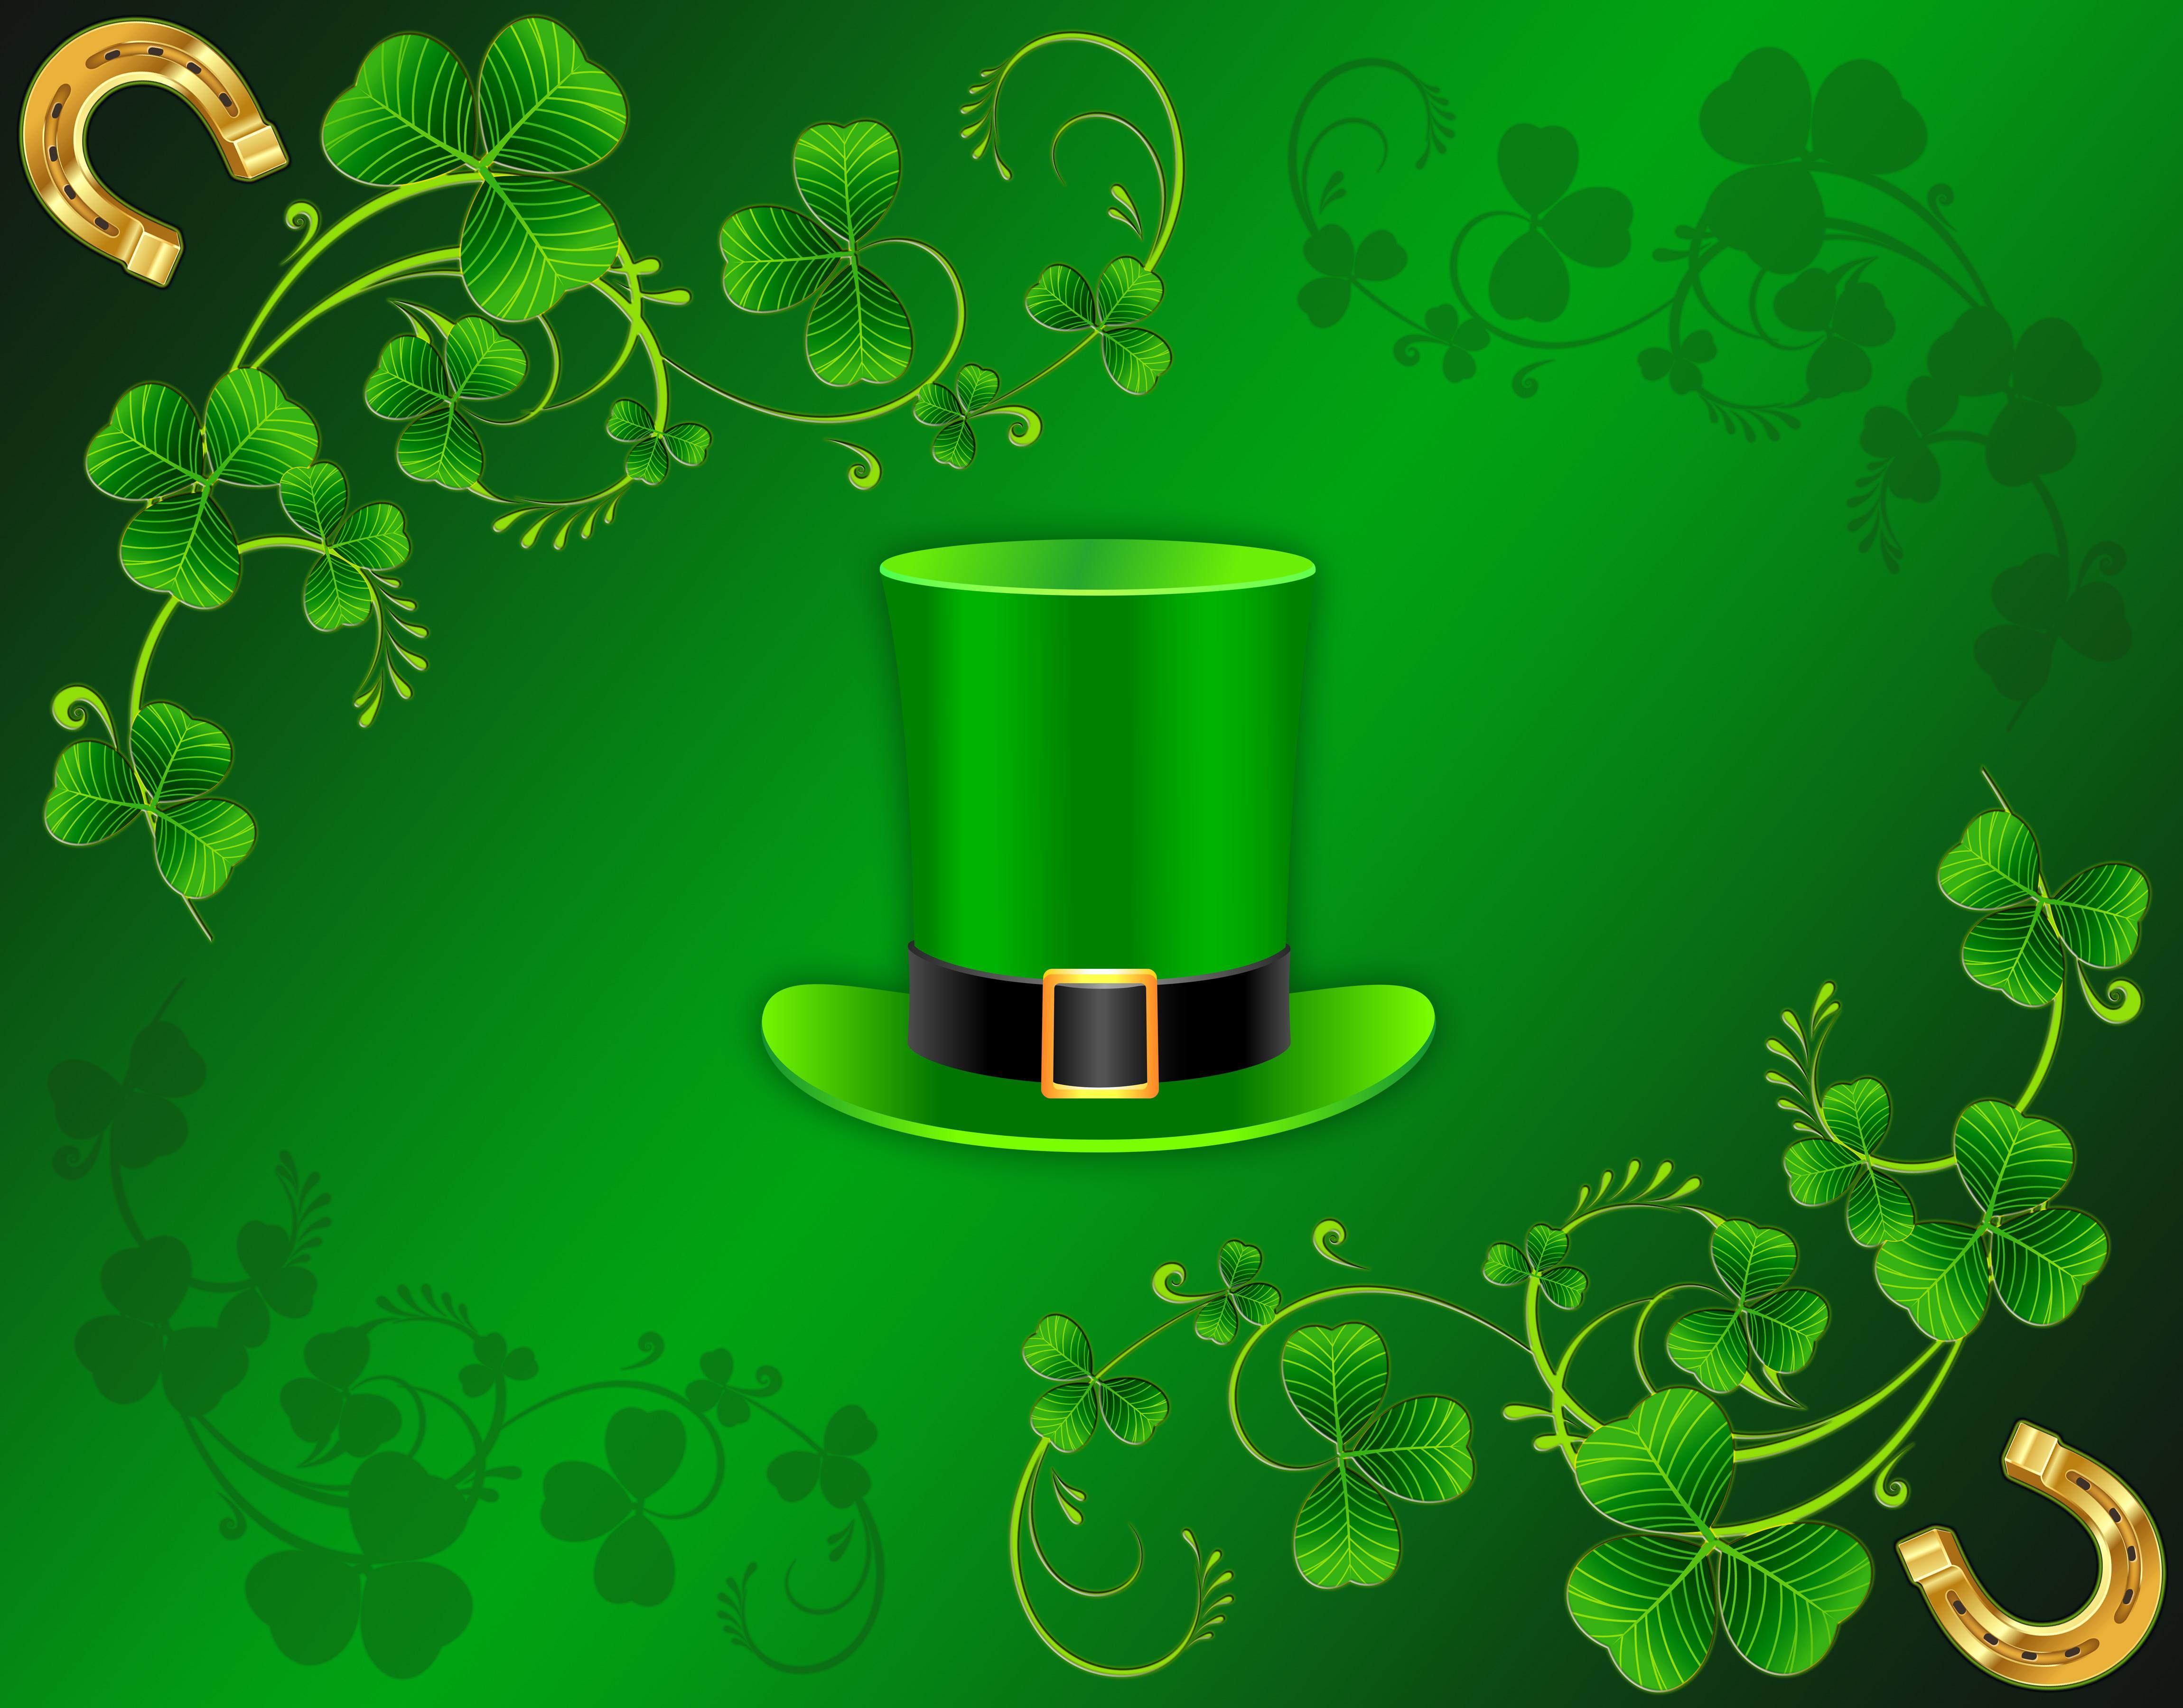 St. Patrick's Day HD Wallpaper and Background Image